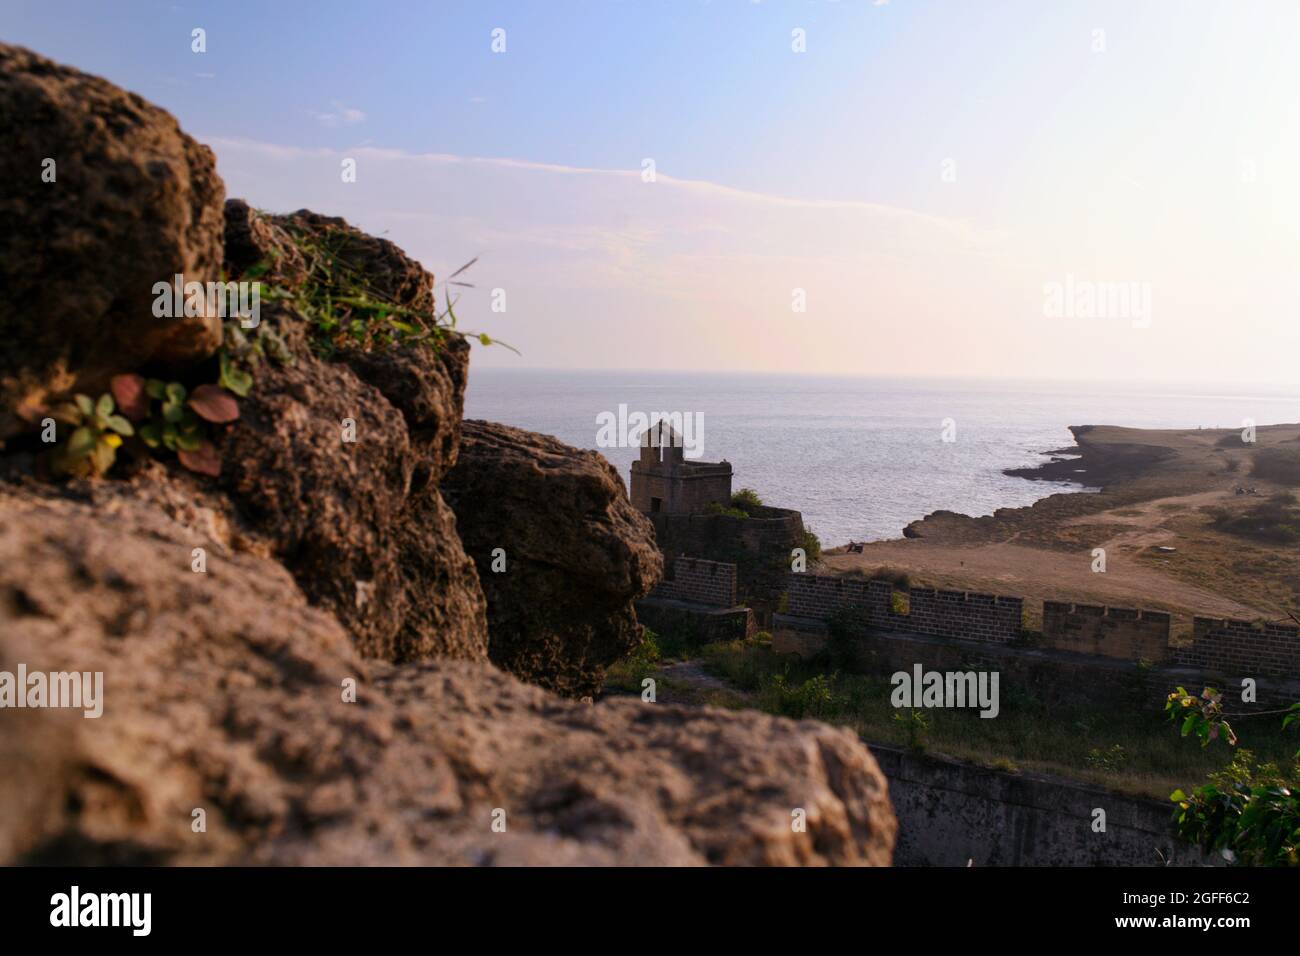 A Photograph of the Diu Coastline with the Sun setting into the horizon in the background and a coastal rock in the foreground. Stock Photo